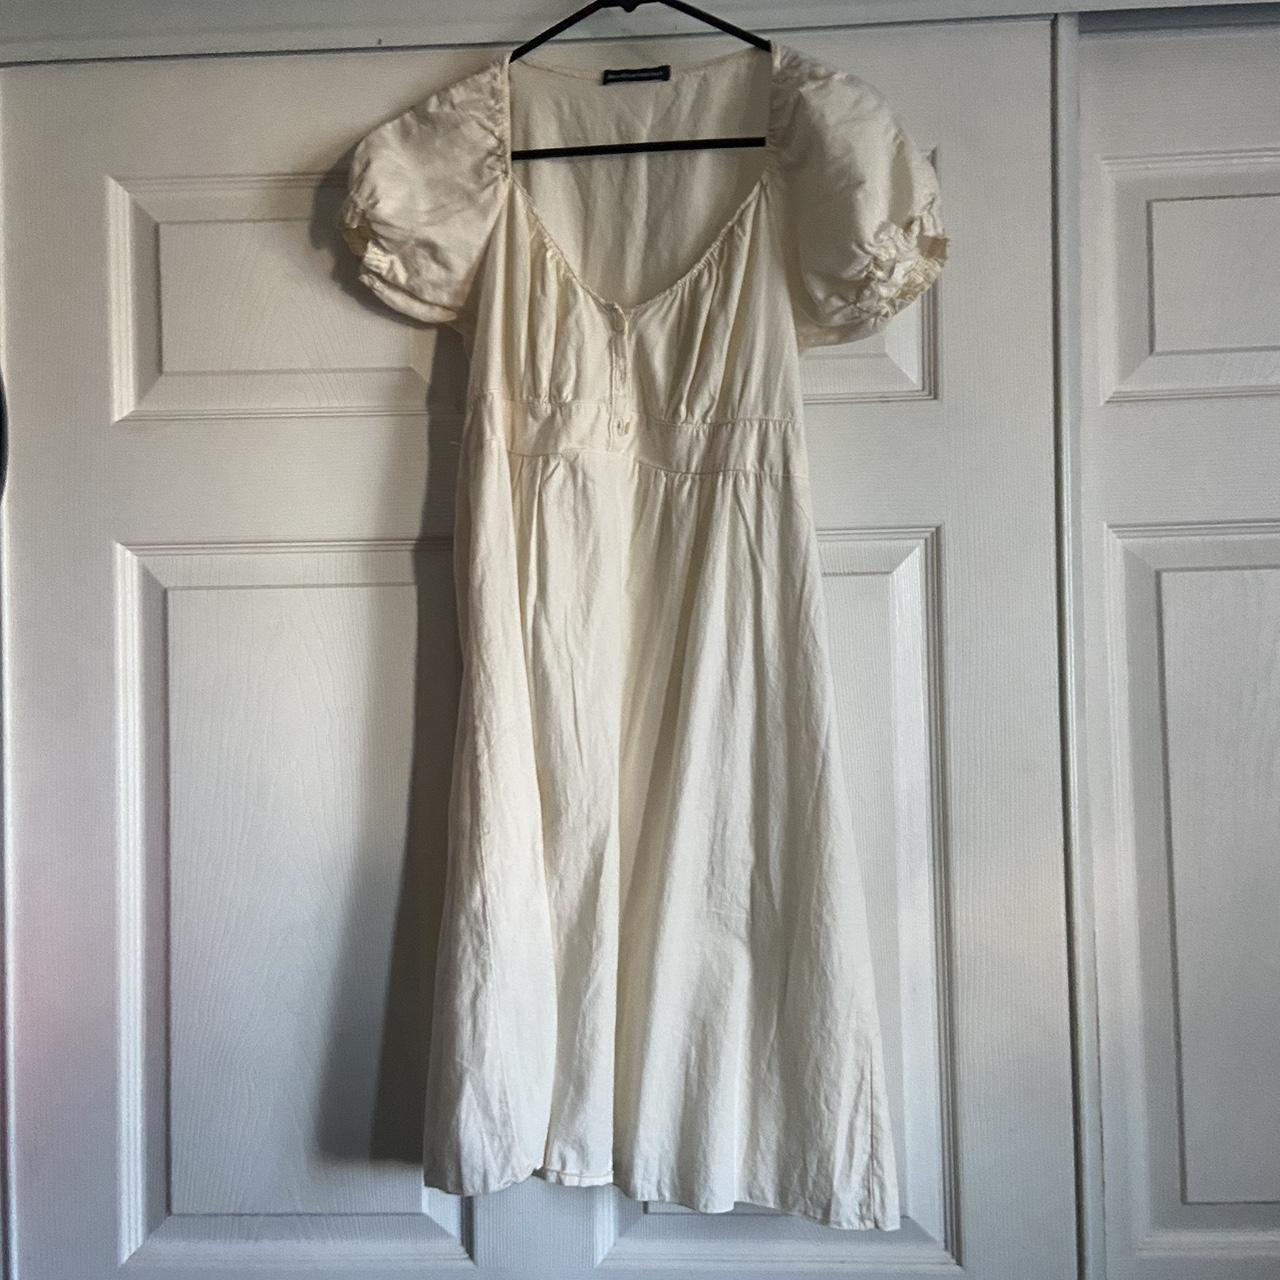 Brandy Melville Blair Dress - Sold out on site USE... - Depop